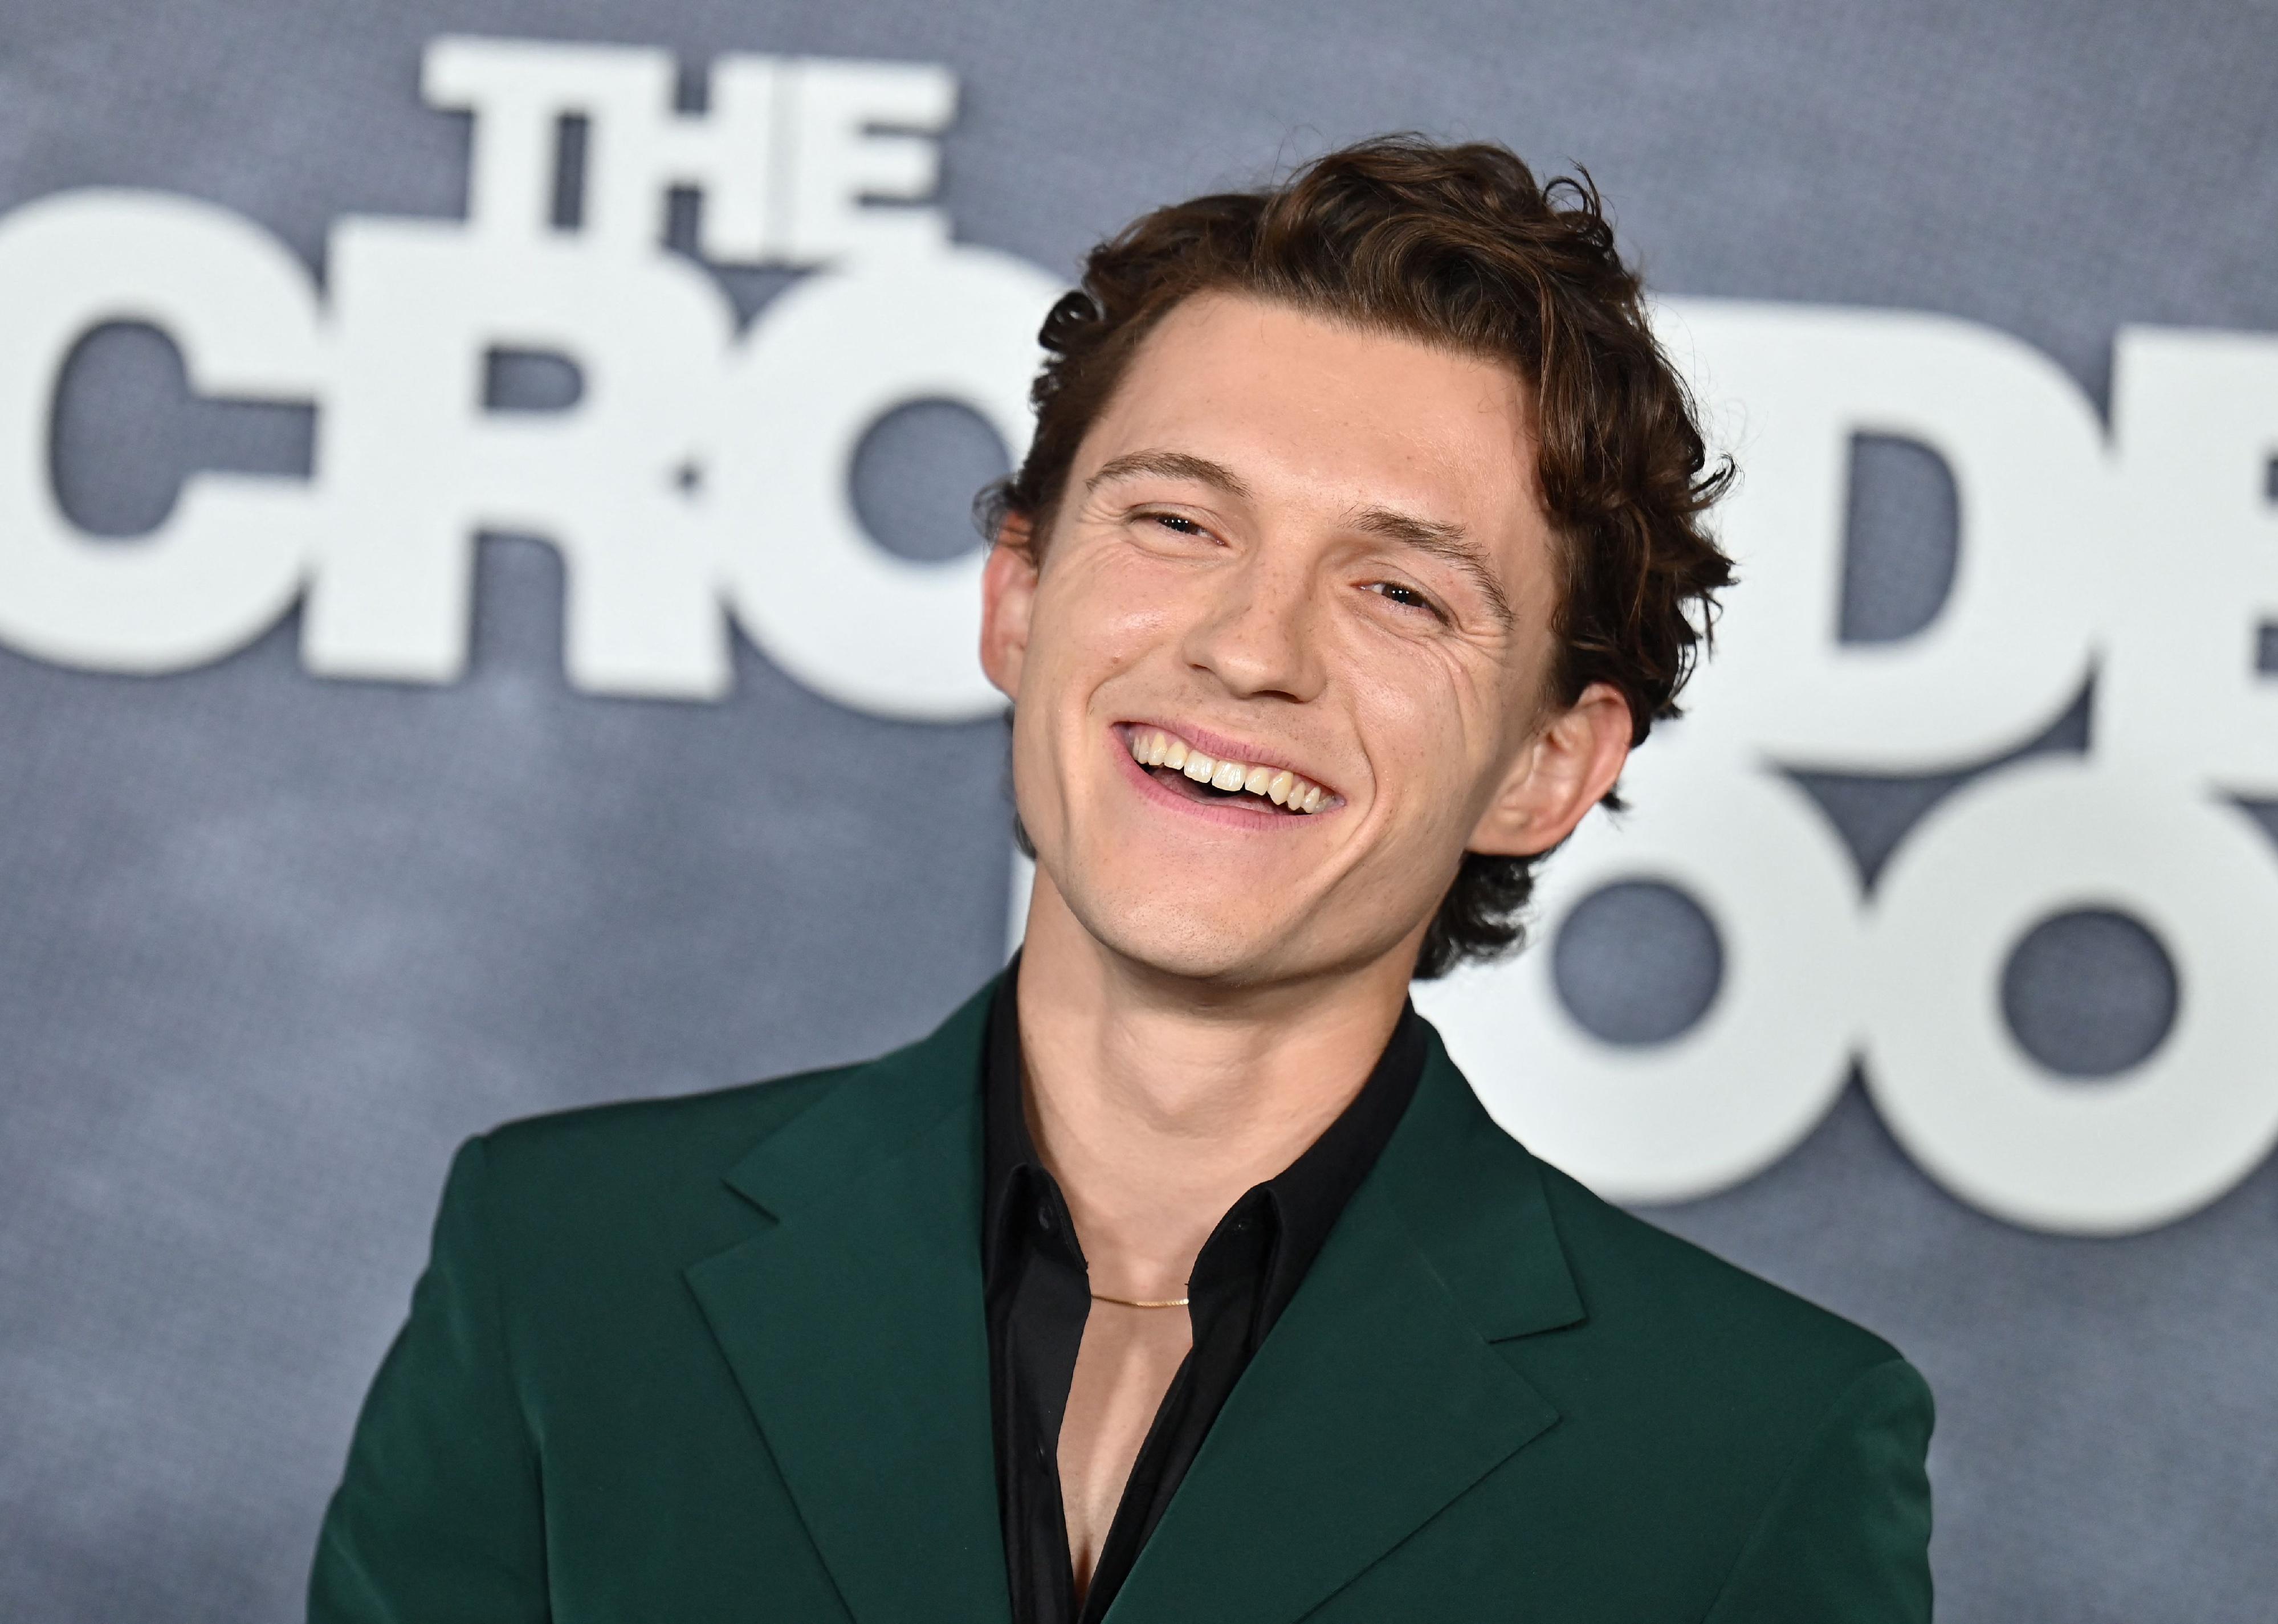 Tom Holland arrives for the premiere of Apple TV+'s "The Crowded Room".